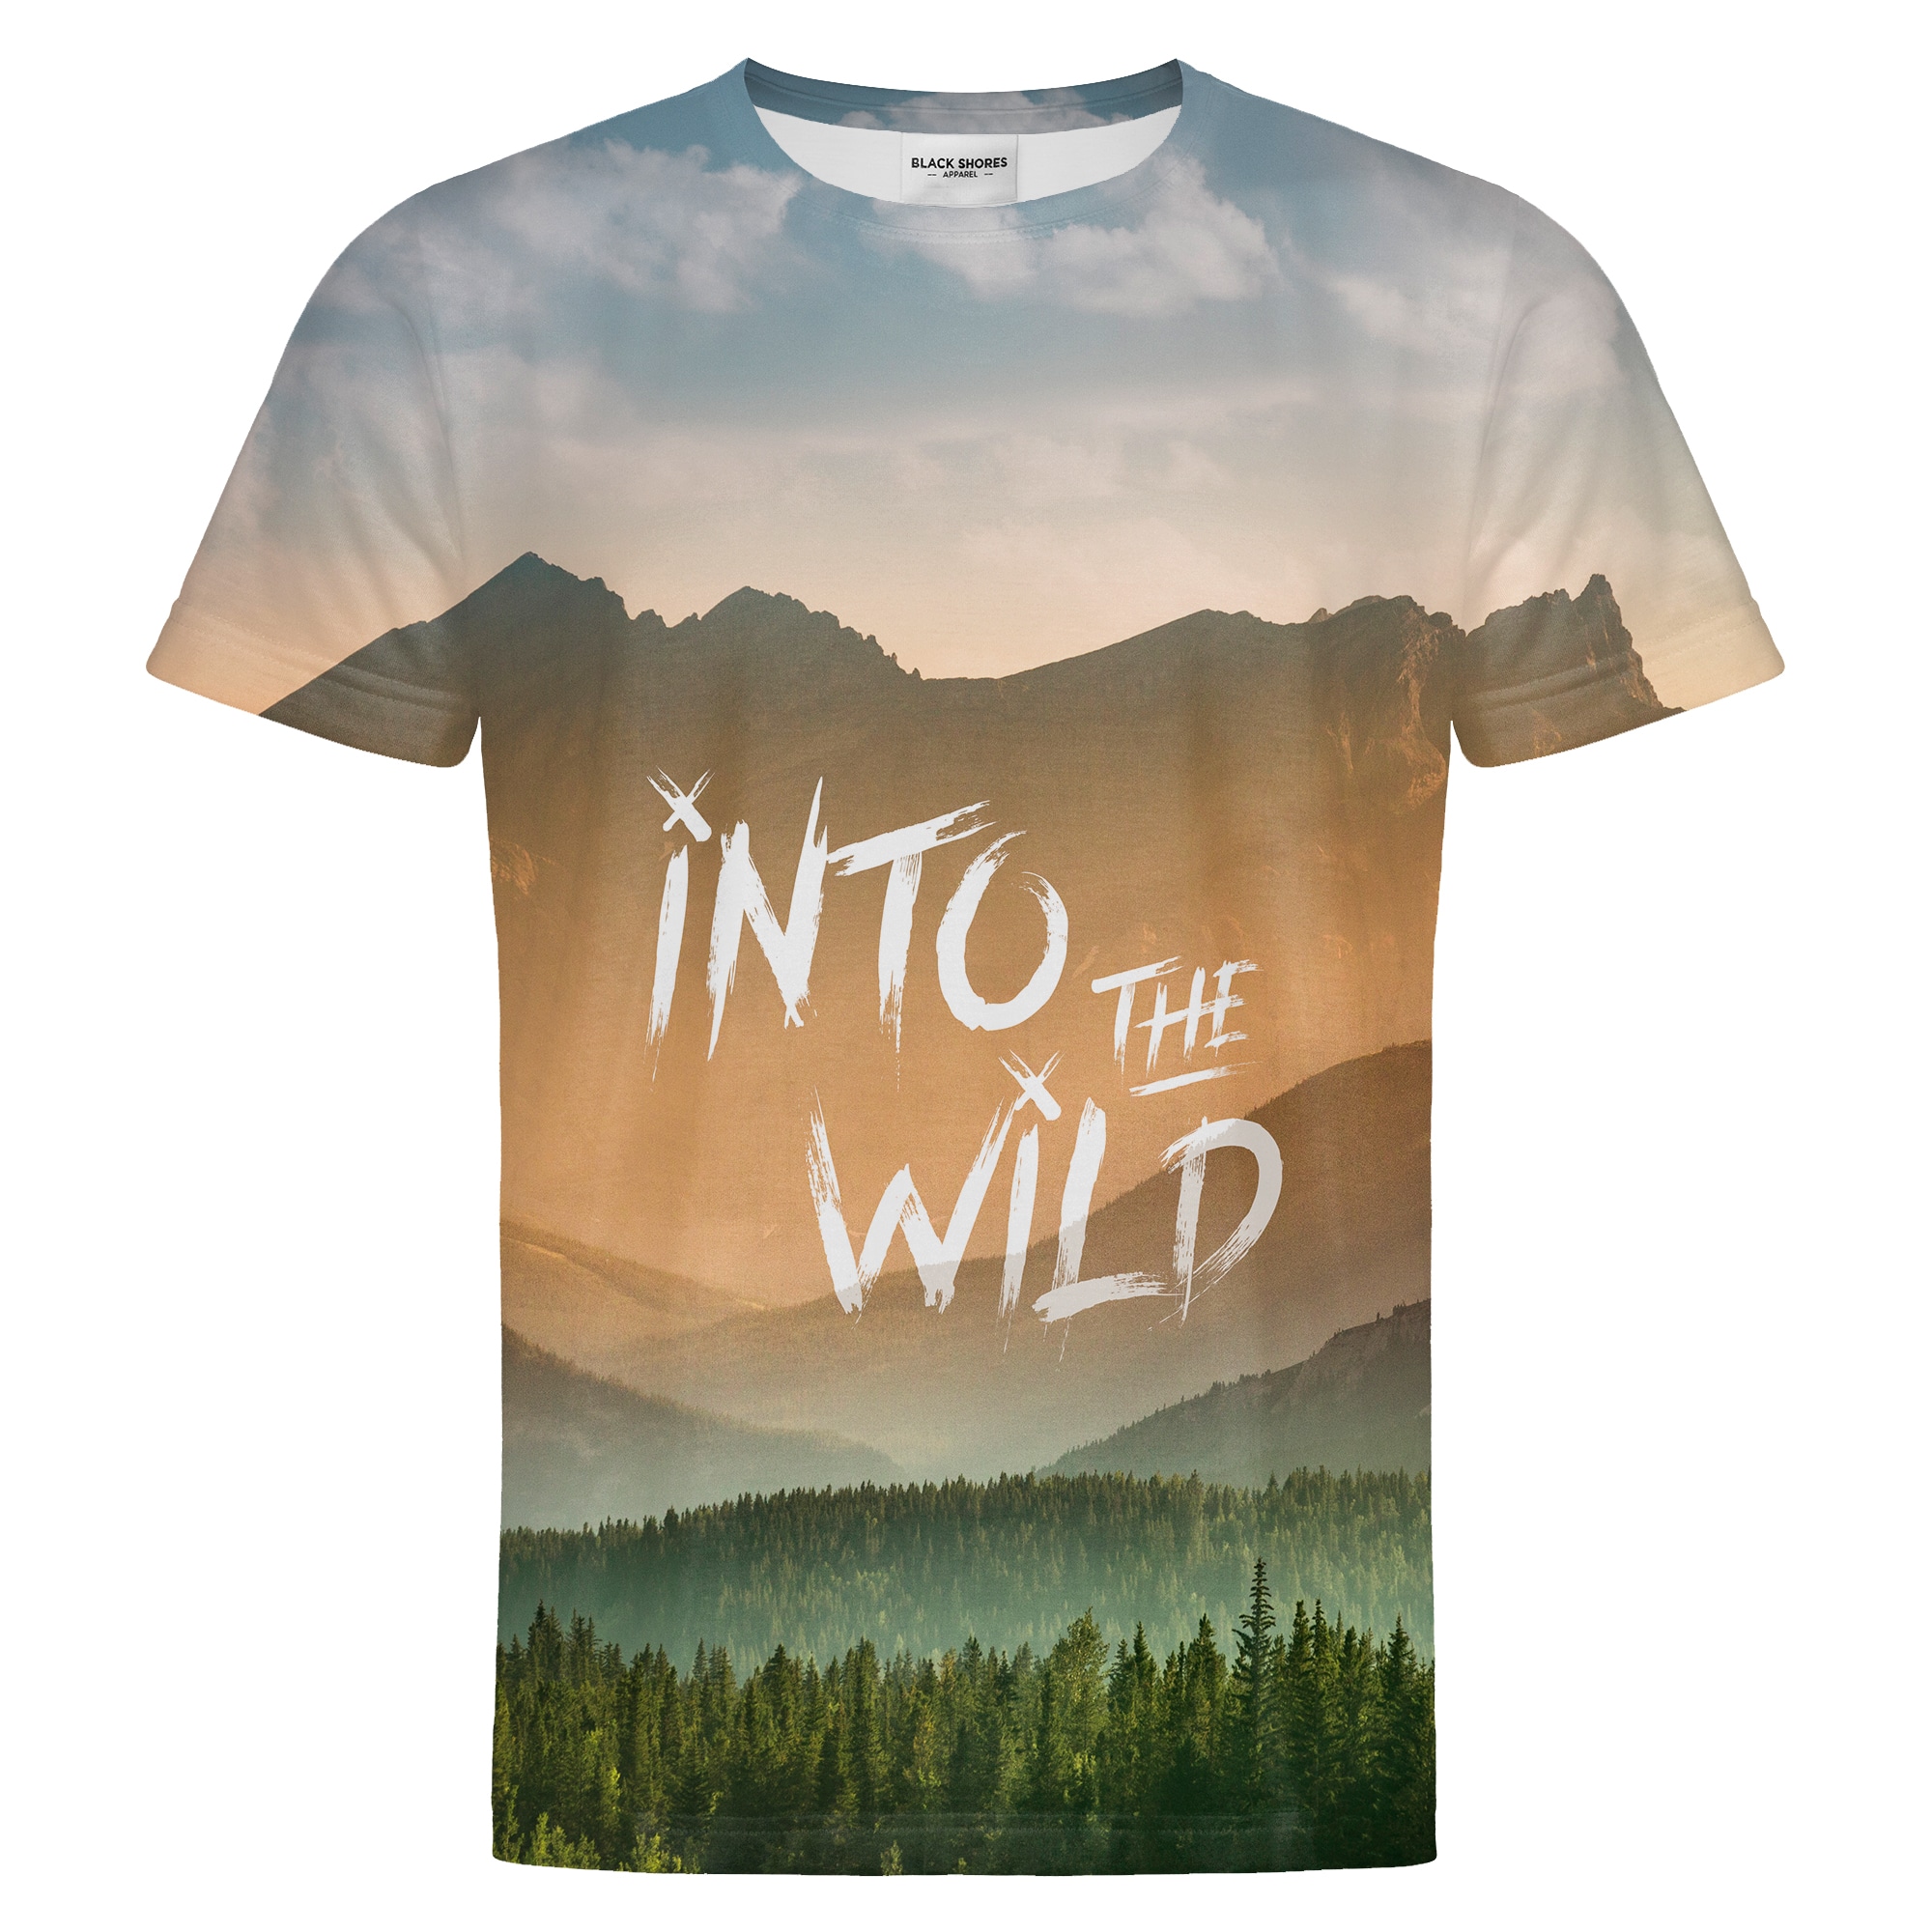 Into The Wild T-shirt – Black Shores - XS